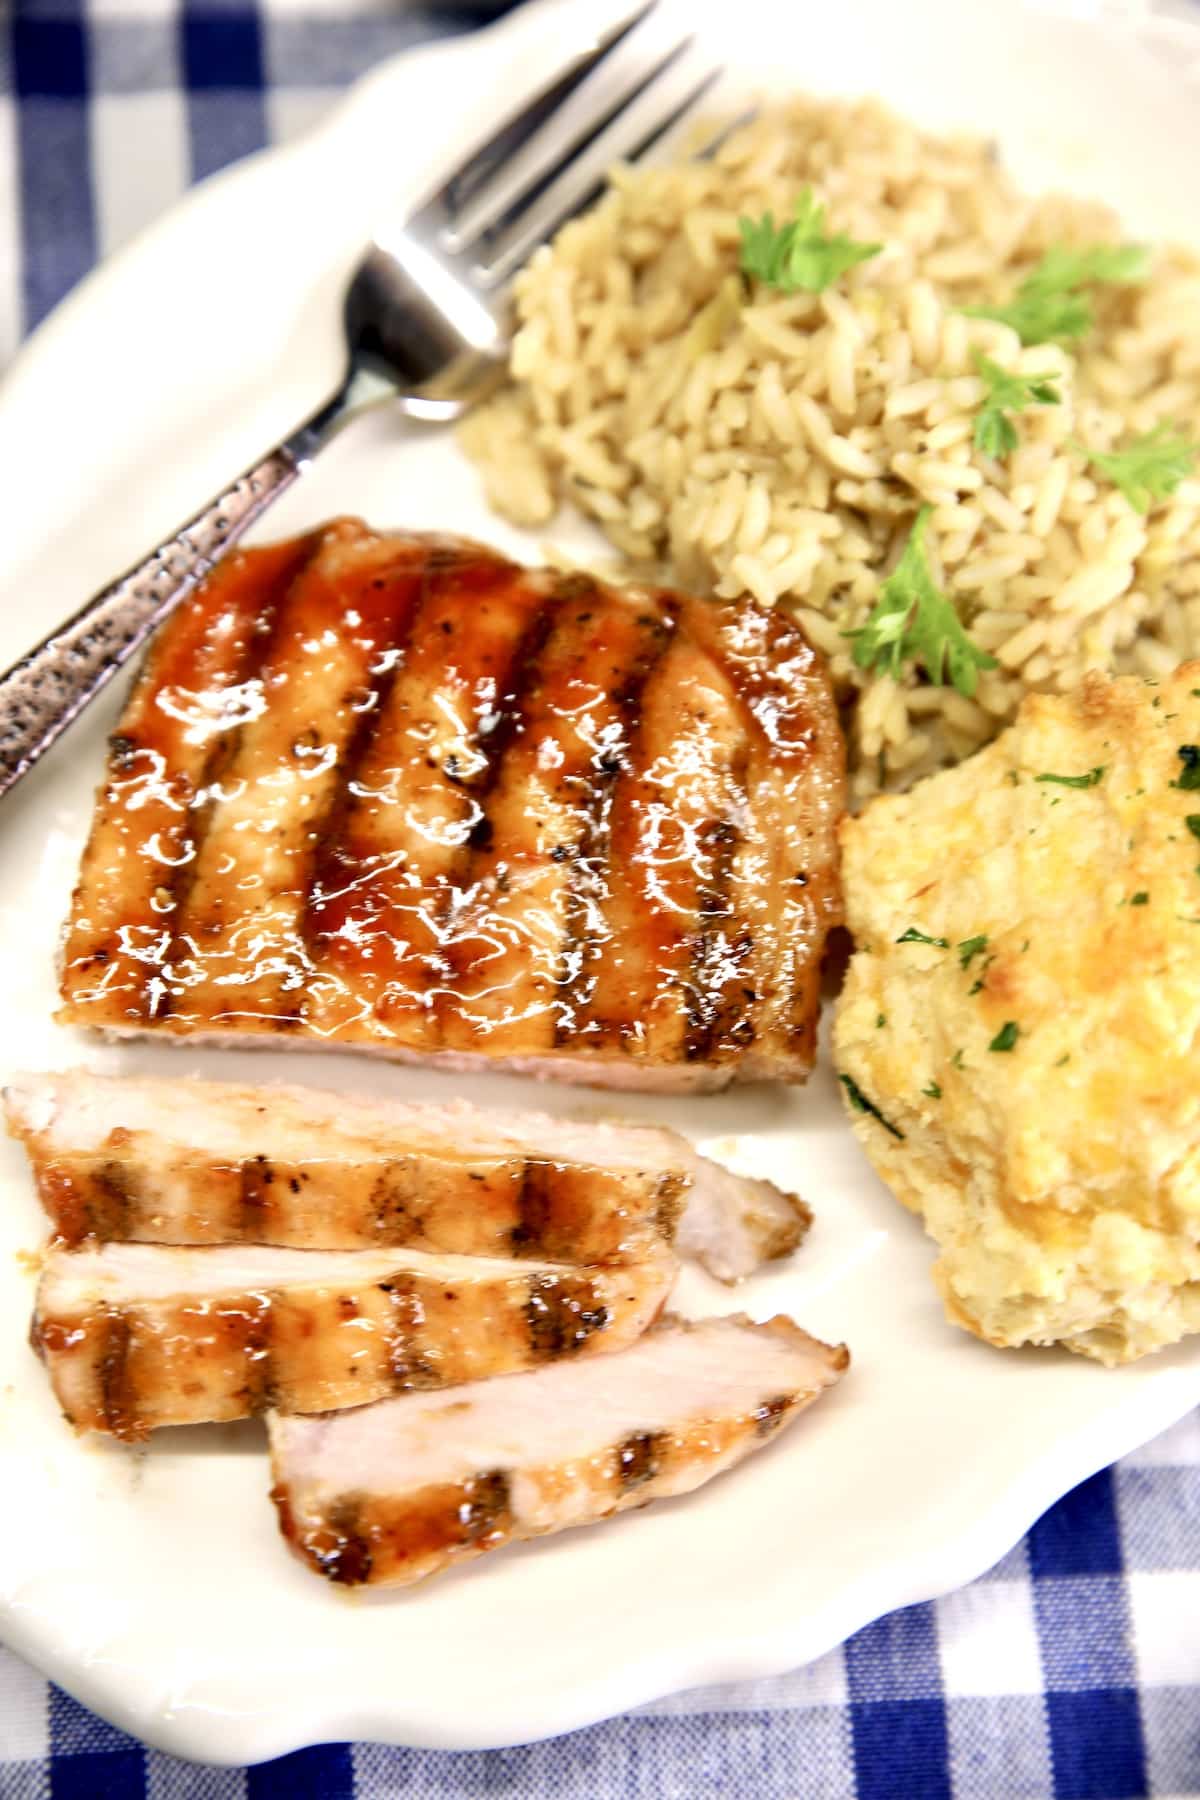 Jalapeno BBQ Grilled pork chop on a plate.